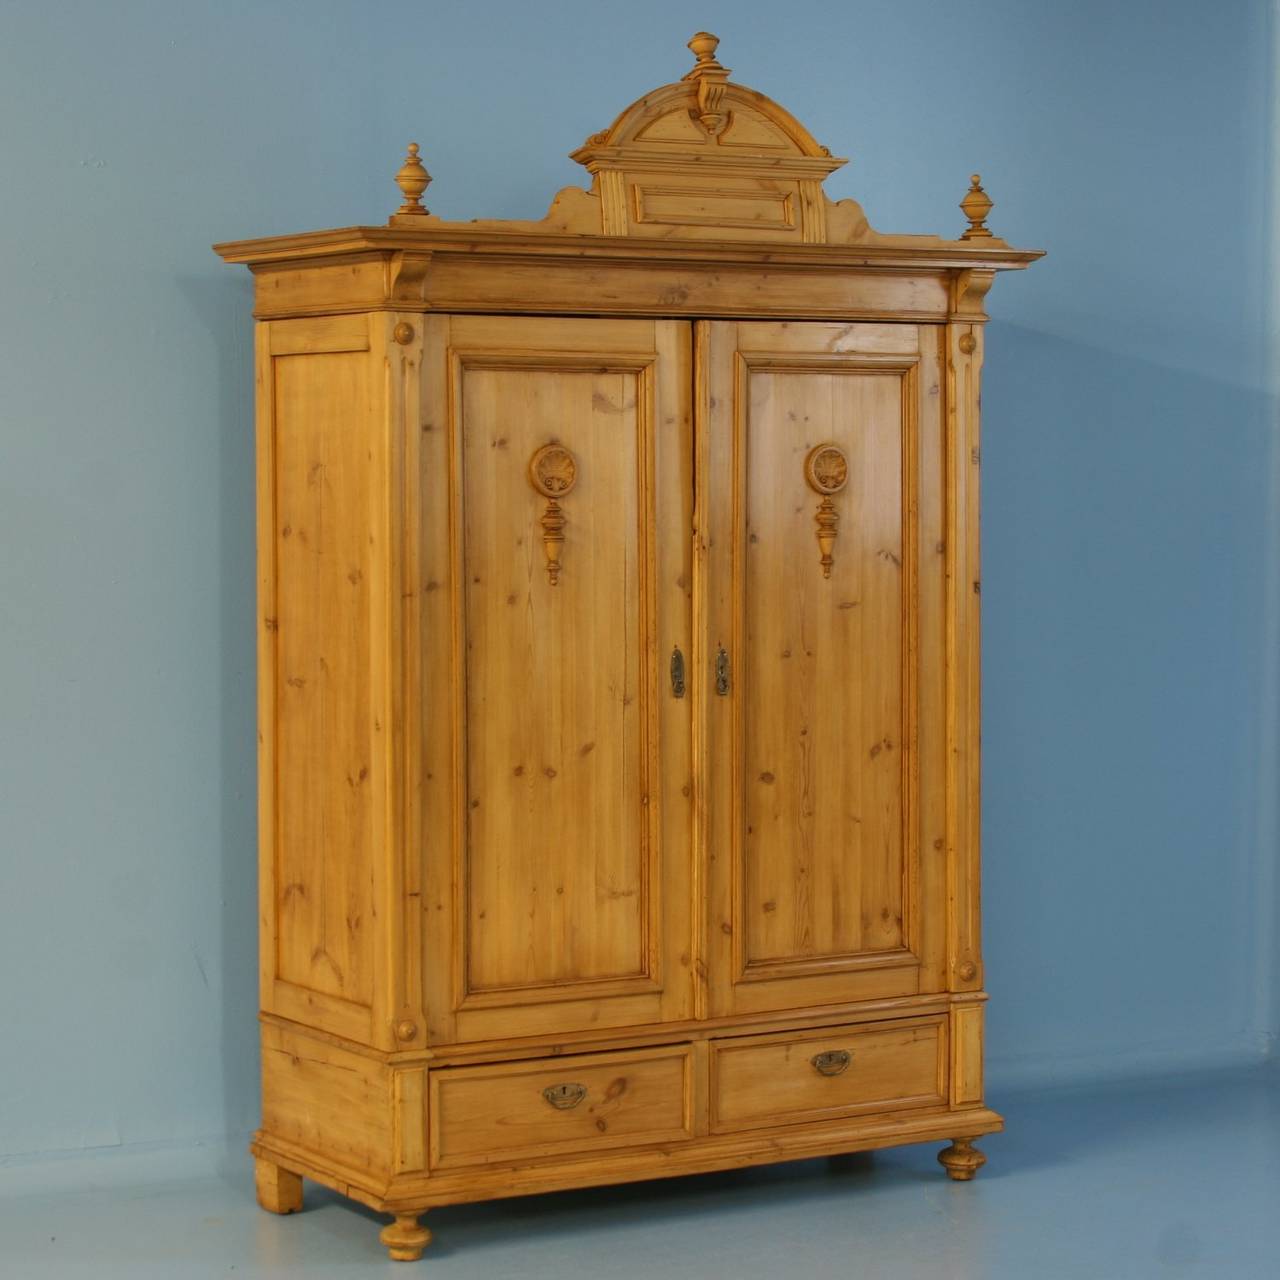 Impressive in stature, this pine armoire has a strong visual presence due to the turned finials and decorative upper crown. Even the paneled doors have decorative carved elements, adding a sophisticated touch to the piece. It is a 2-door over